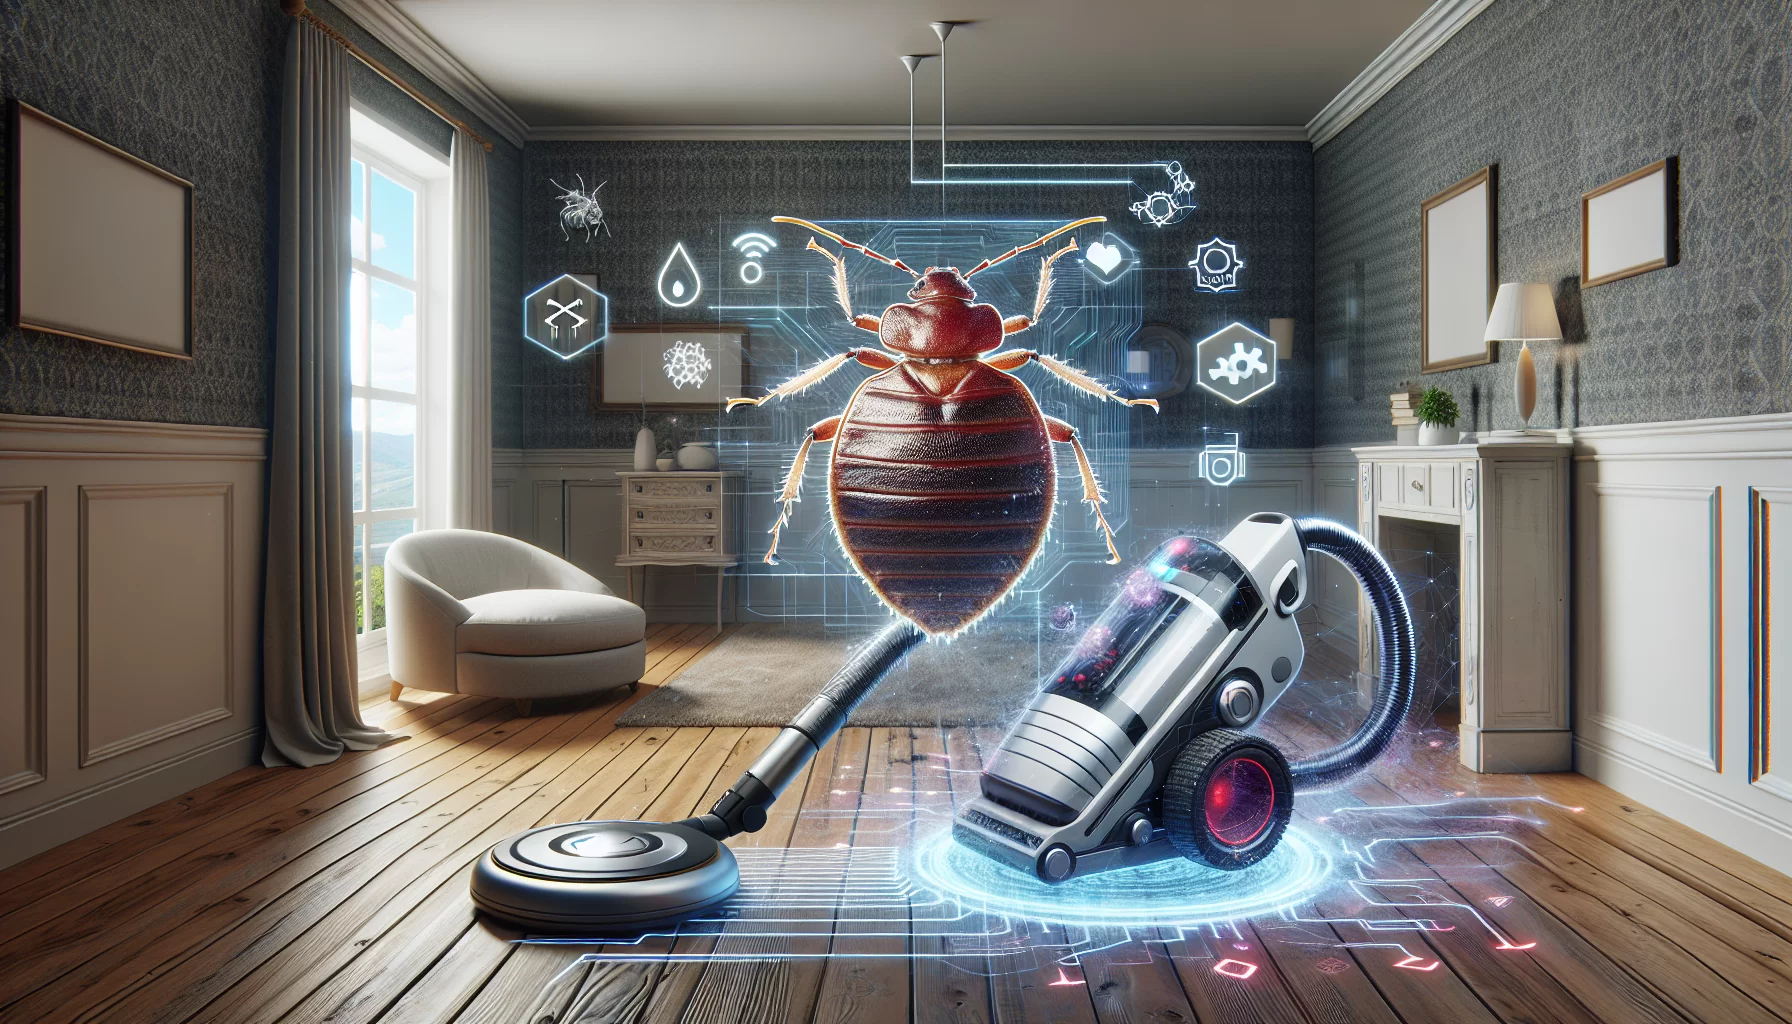 Exposing bed bug myths: the role of hygiene and technology